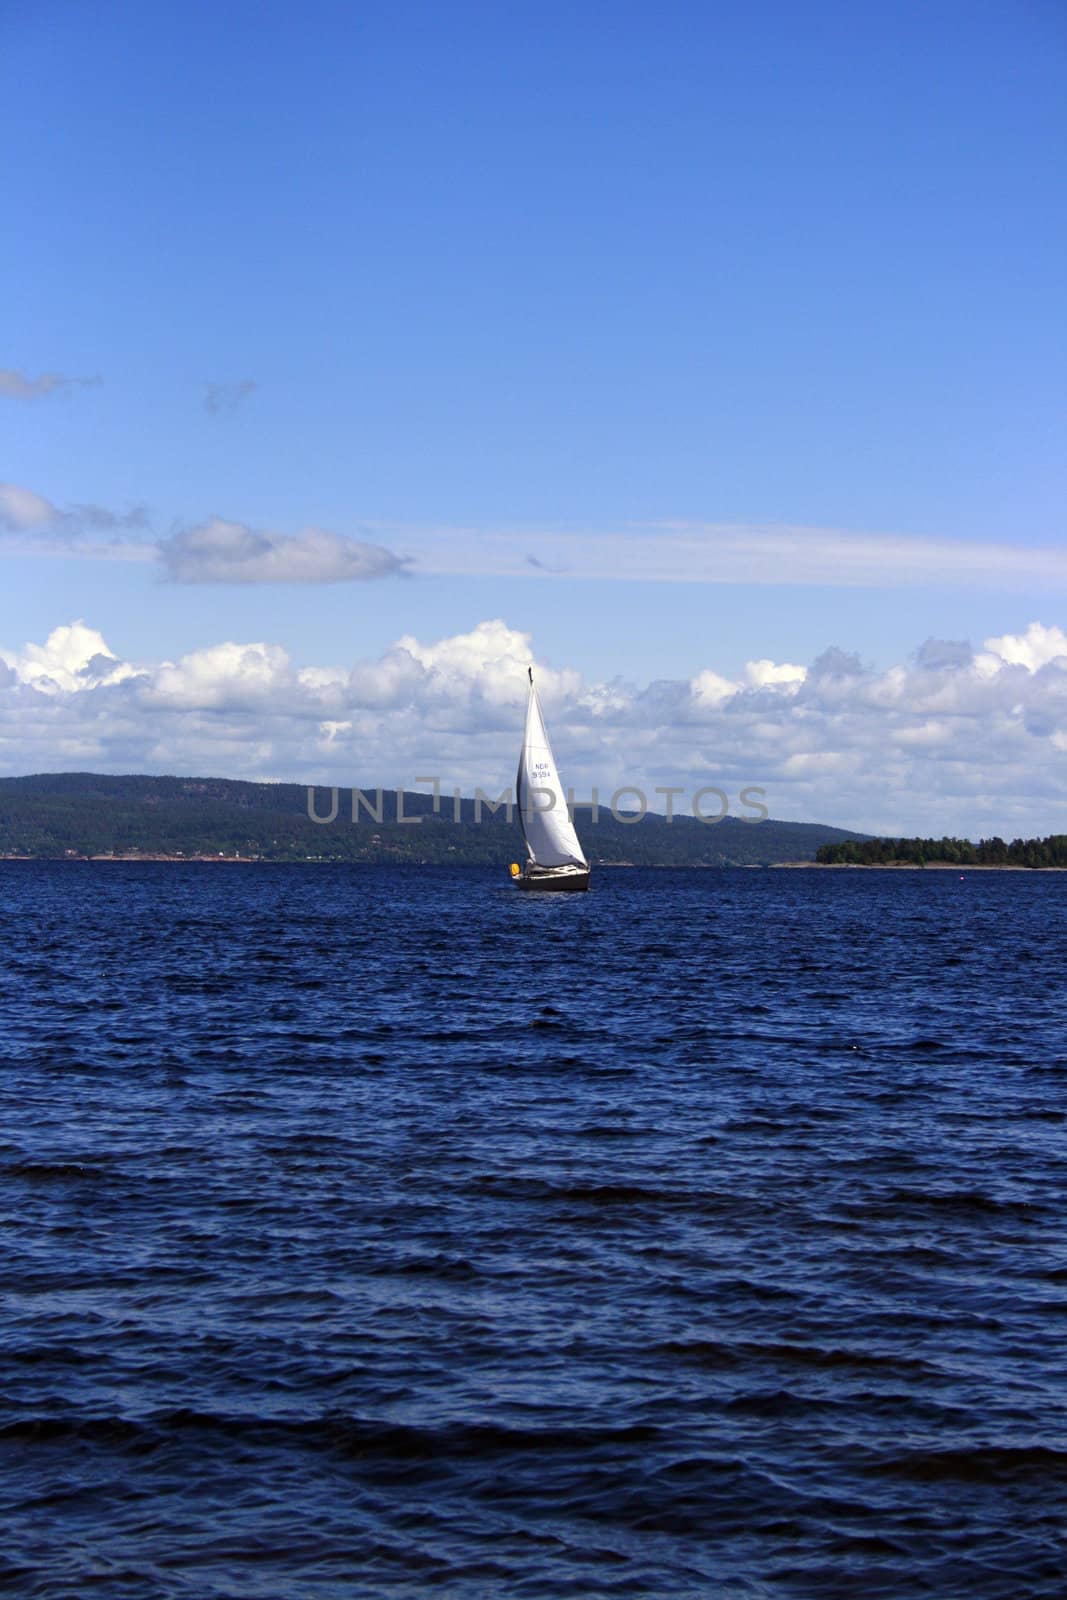 a sail boat nearing the harbour in Holmestrand, Norway.